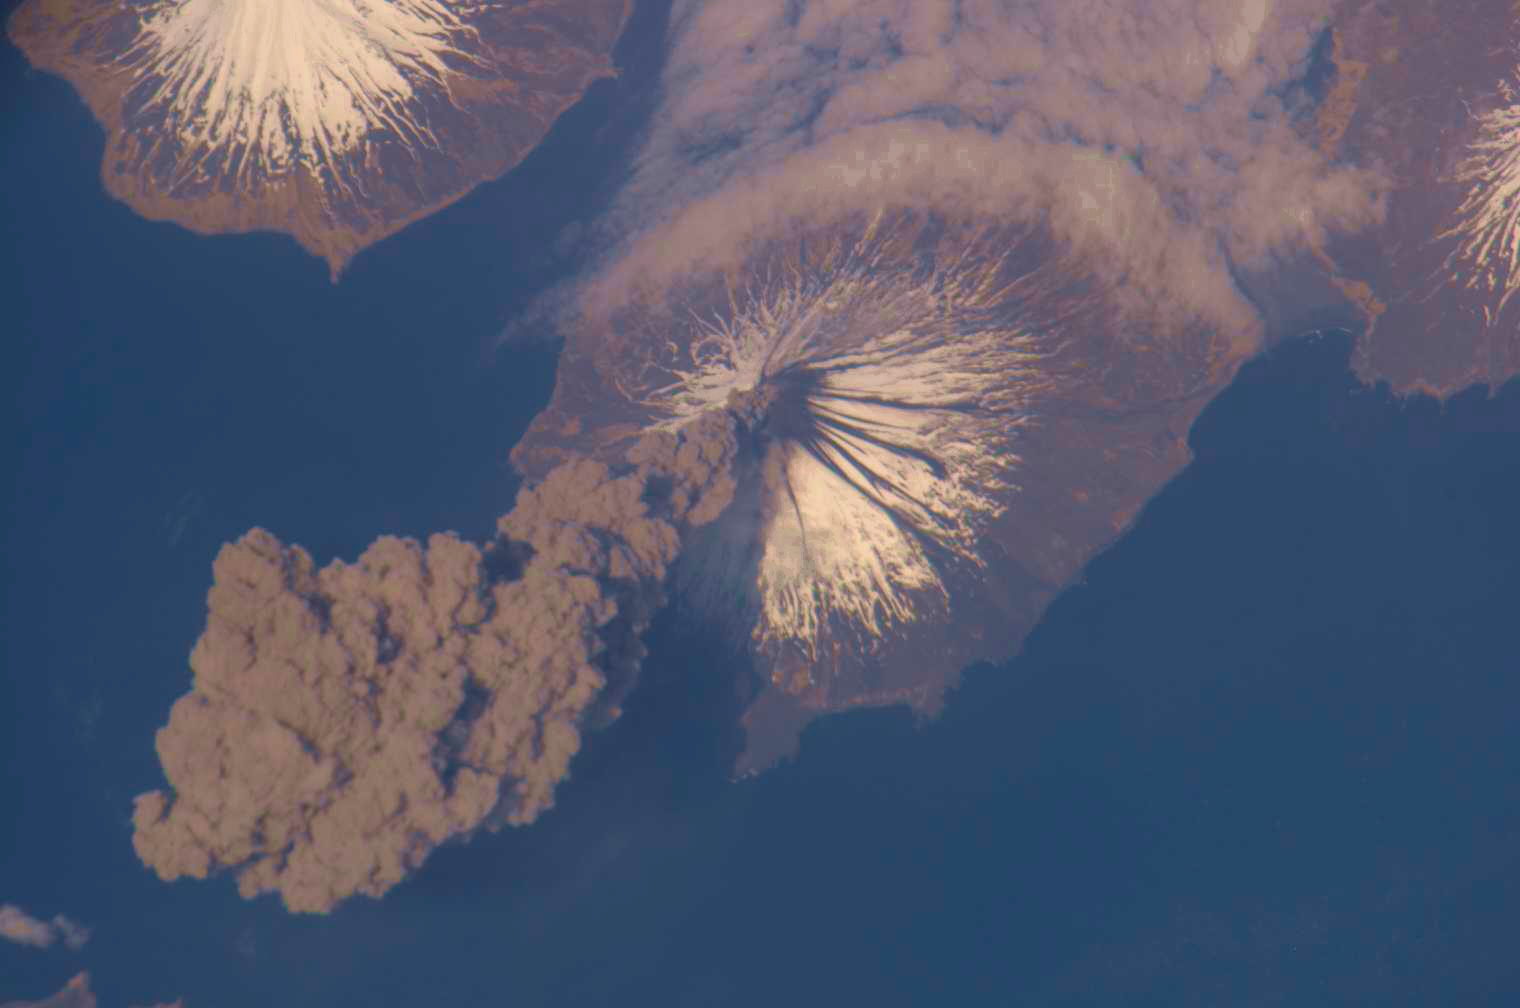 volcanoes category image